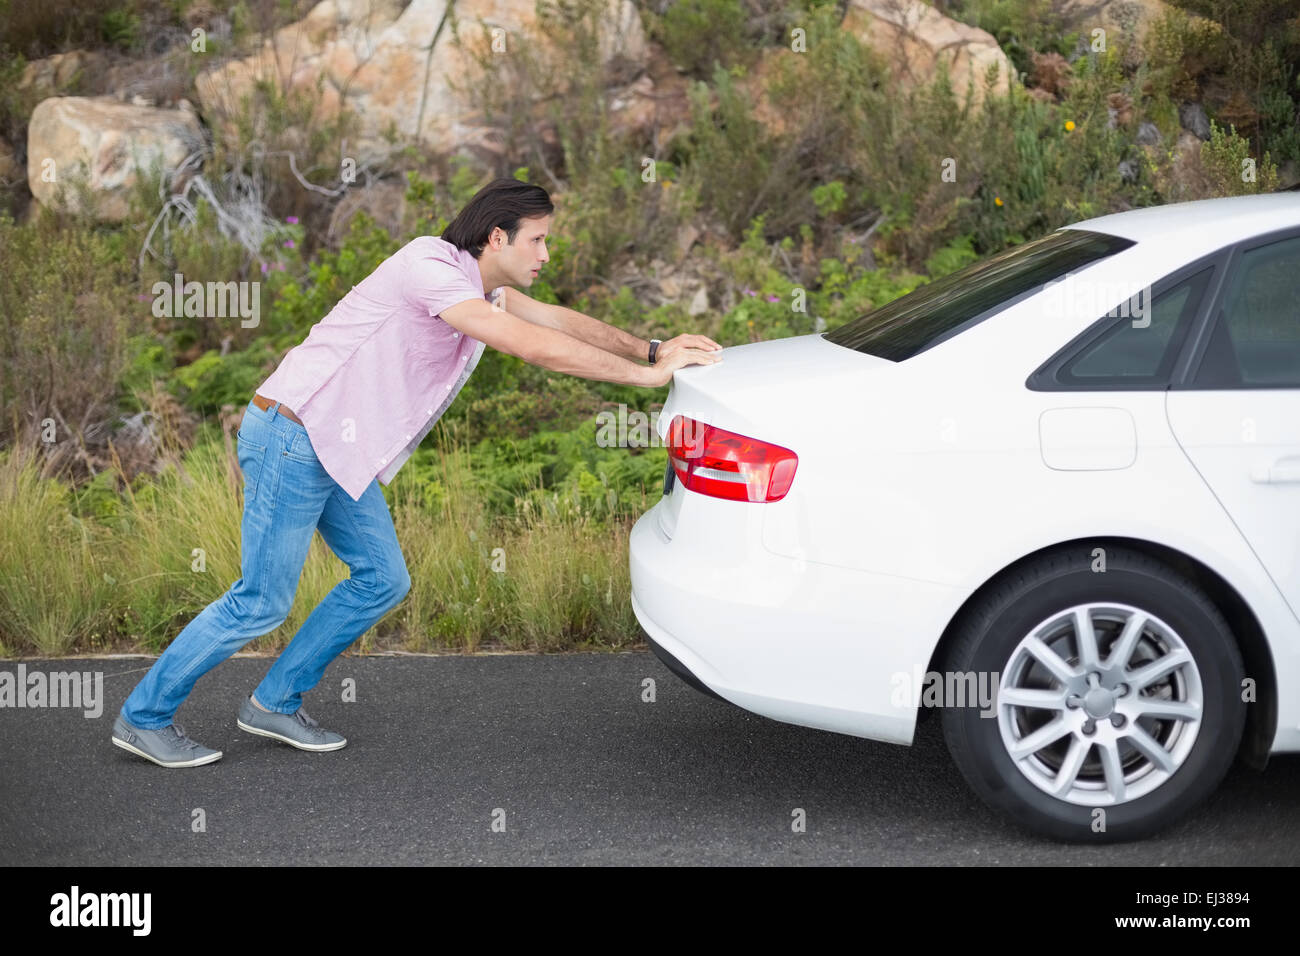 Man pushing car after a car breakdown Stock Photo